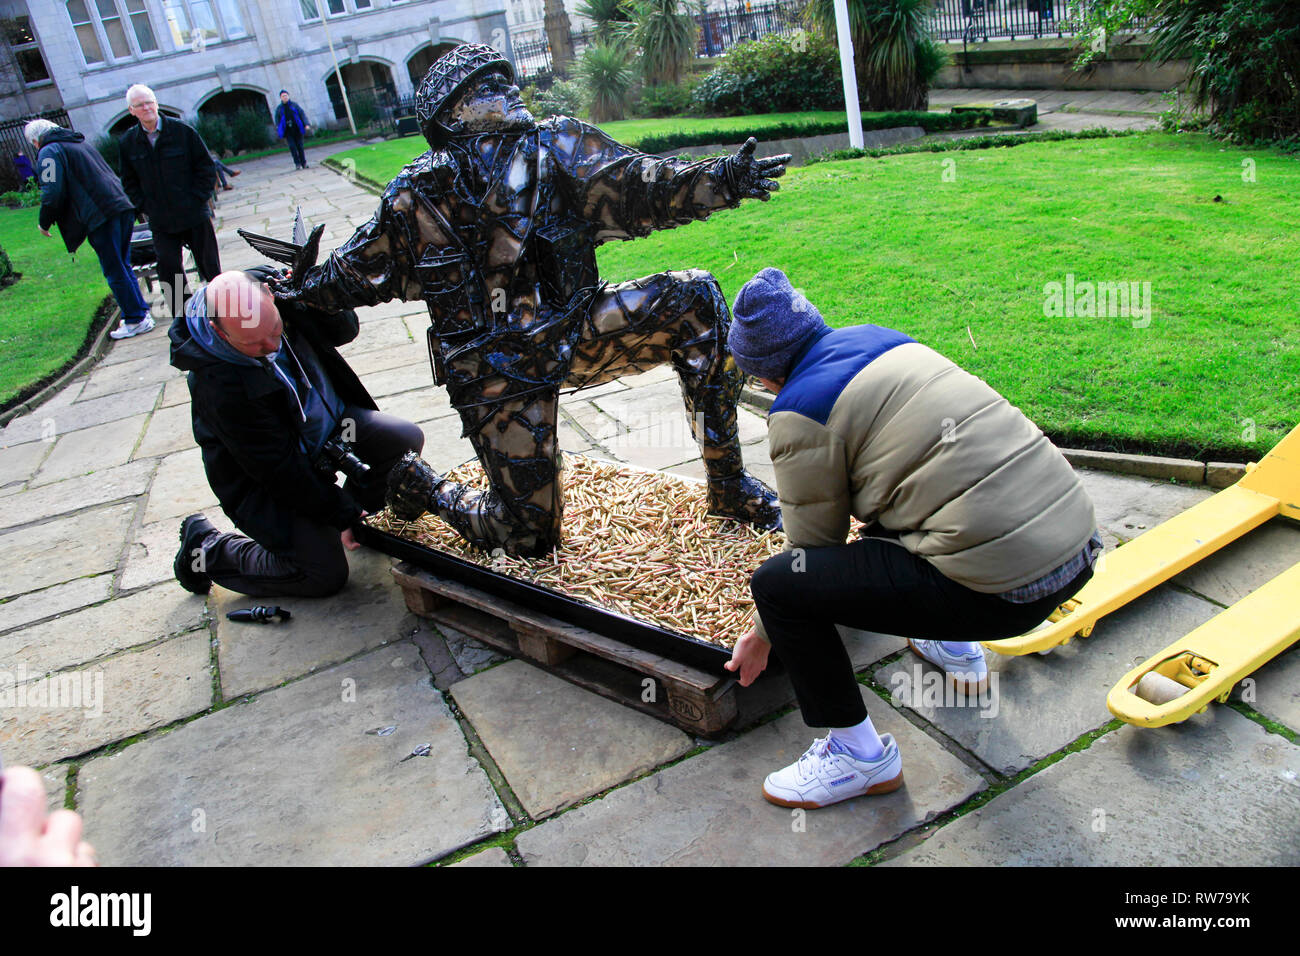 Liverpool, UK. 5 March 2019. A sculpture by artist Alfie Bradley incorporating more than 4,000 replica bullets has been unveiled in the grounds of Liverpool Parish Church ahead of the 75th anniversary of D-Day. 'Soldiers of Sacrifice' represents Denham Brotheridge, believed to be the first Allied soldier to be killed by enemy action on D-Day in June 1944. The sculpture is due to go on a tour of England and Normandy before reaching its permanent home in Portsmouth. The soldier is crouched down as if to throw a grenade, but instead he is releasing a dove of peace. Premos/Alamy Live News Stock Photo